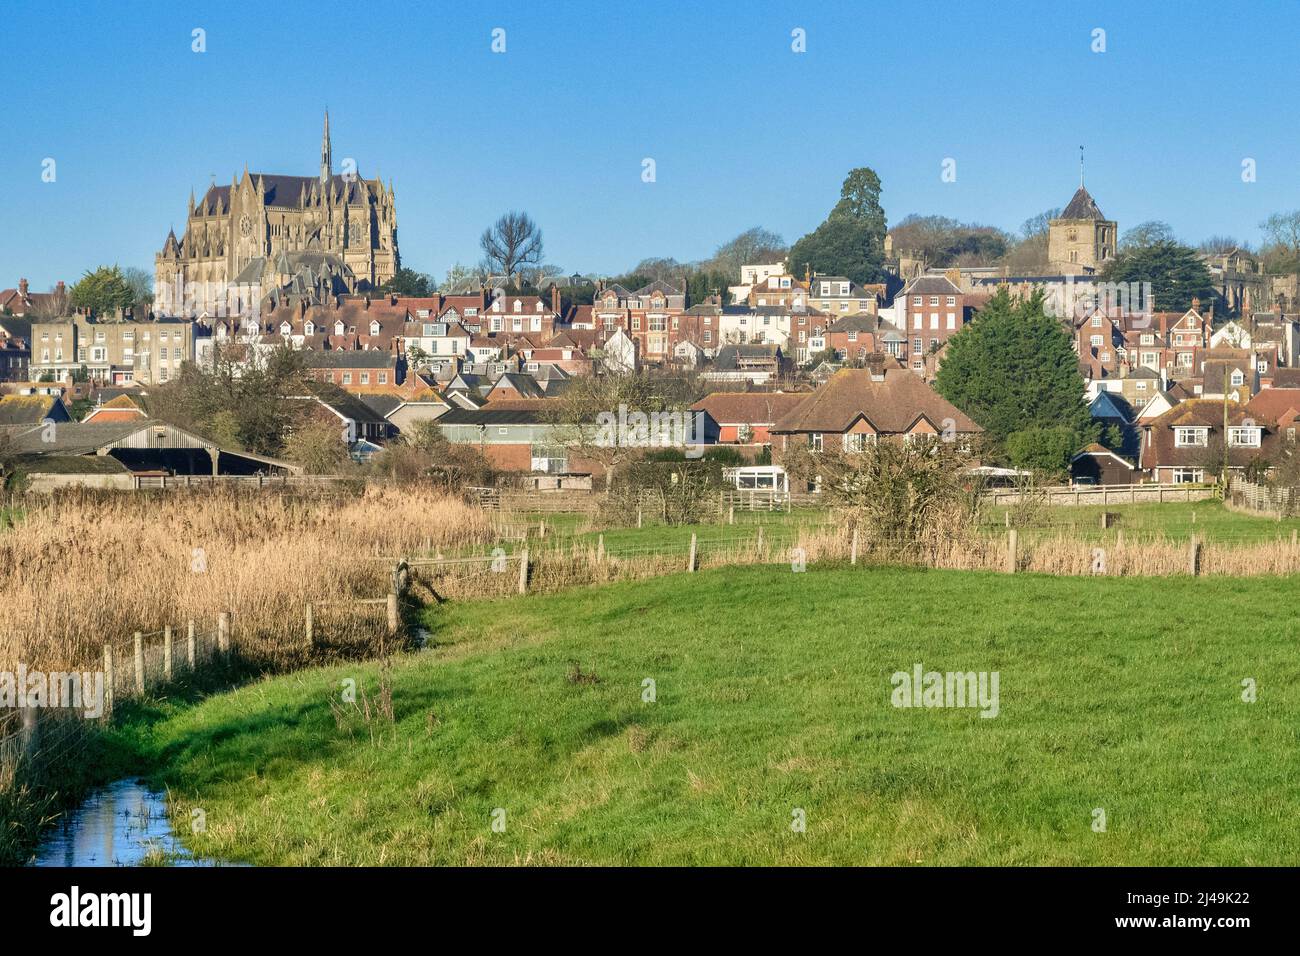 The market town of Arundel, West Sussex, with its skyline dominated by the Roman Catholic Cathedral and the Church of St Nicholas. Stock Photo